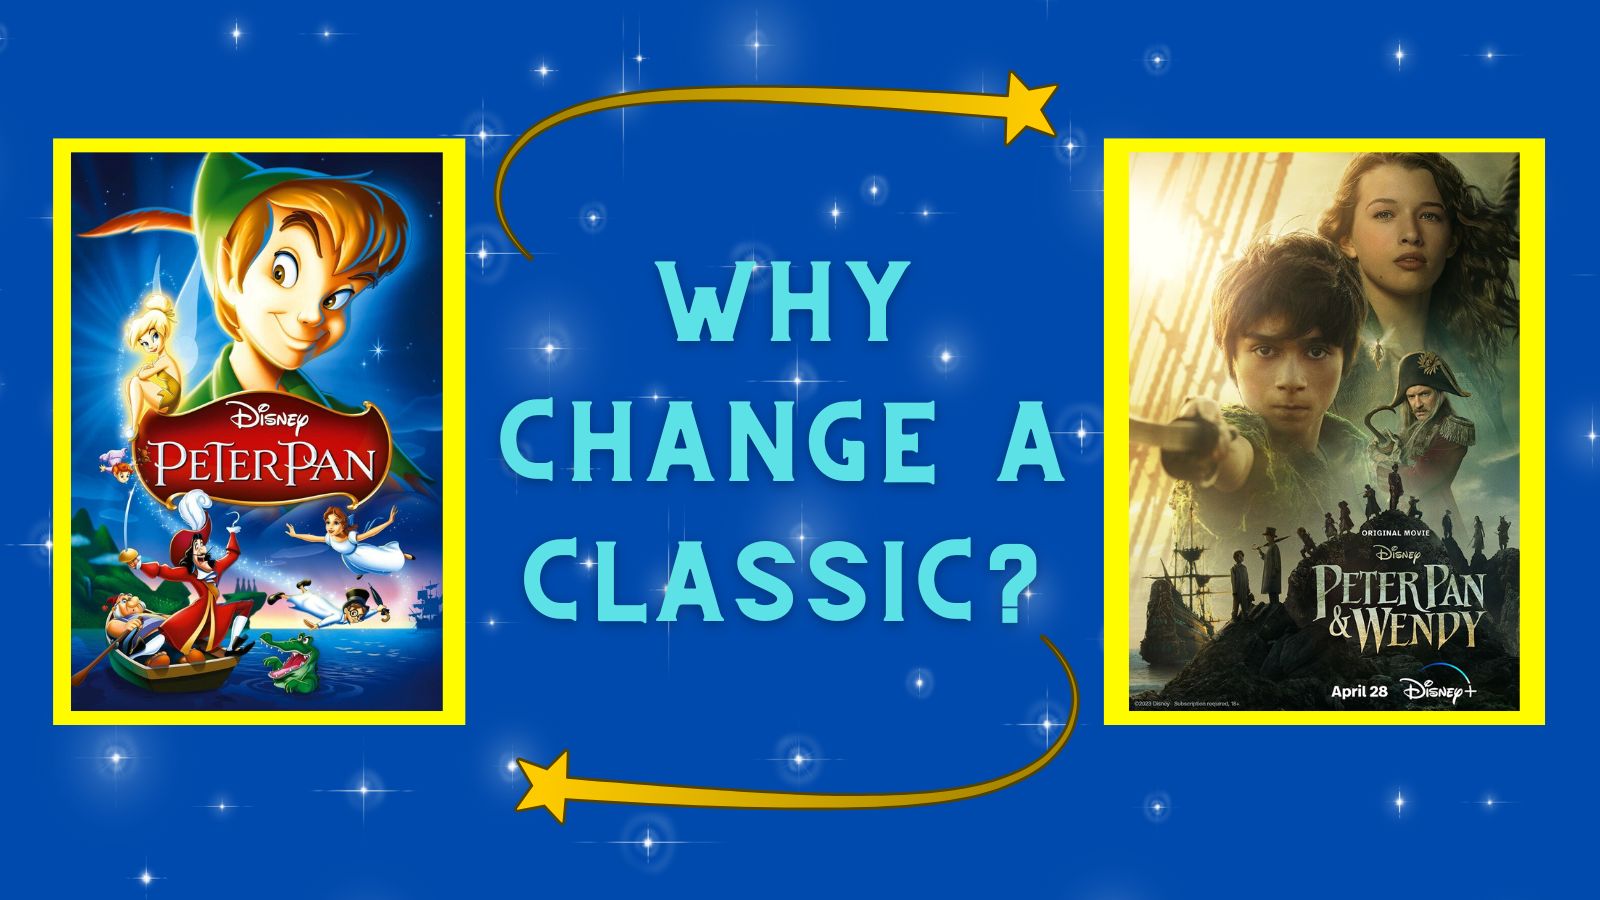 why change a classic peter pan and wendy changes title on a blue background with both movie posters